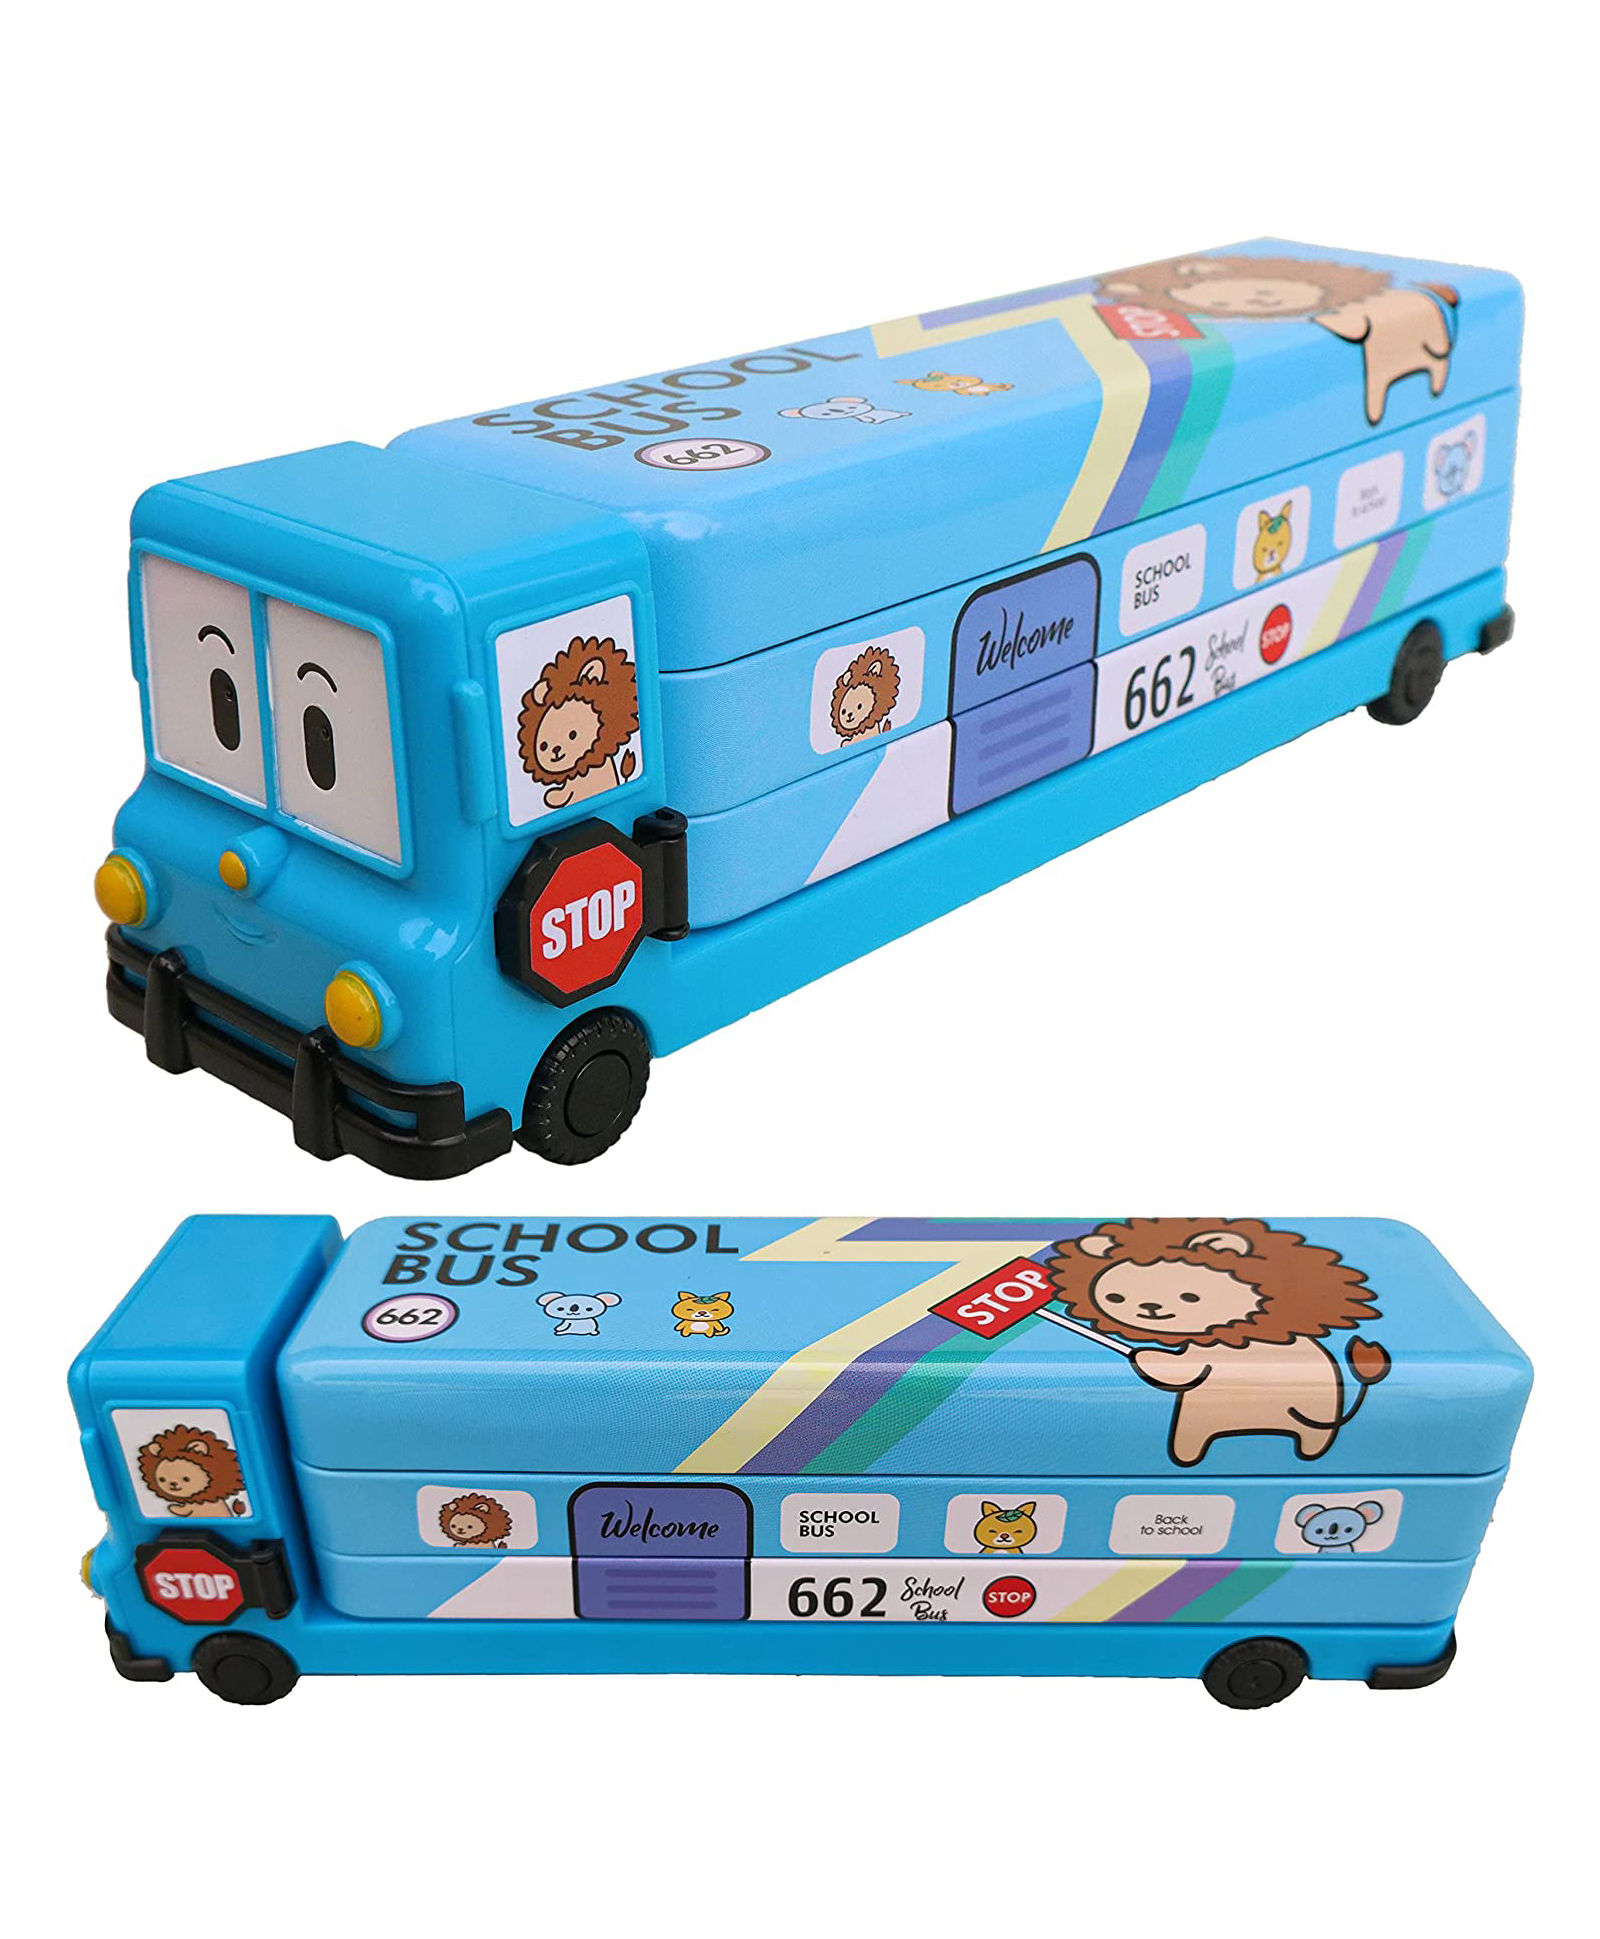 Toyshine Cartoon Printed School Bus Themed Metal Pencil Box with Moving  Tyres - Blue Online in India, Buy at Best Price from  - 9856334